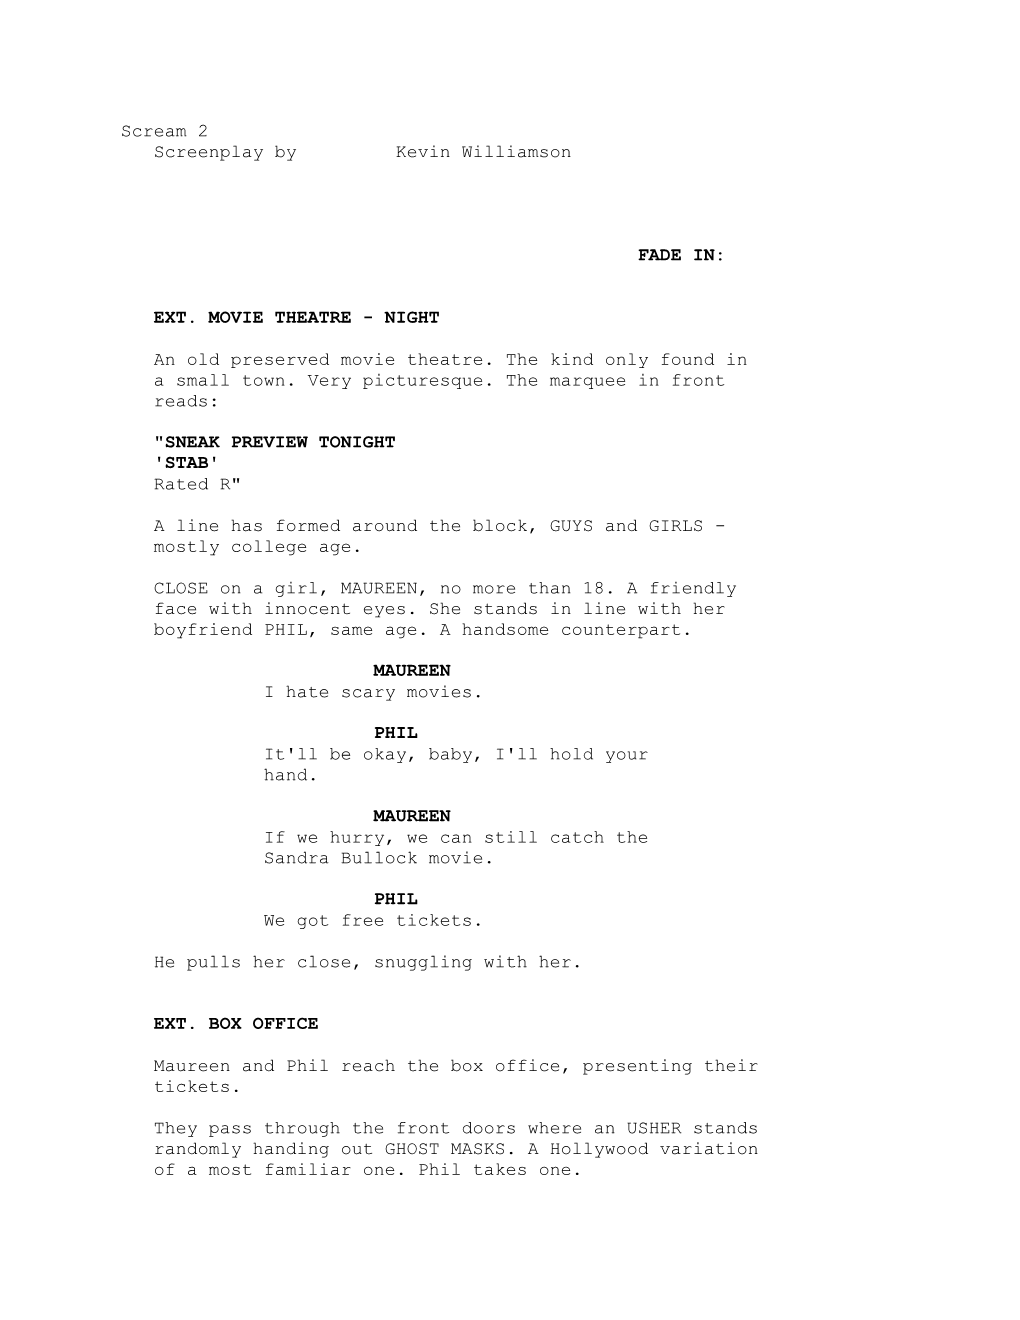 Scream 2 Screenplay by Kevin Williamson FADE IN: EXT. MOVIE